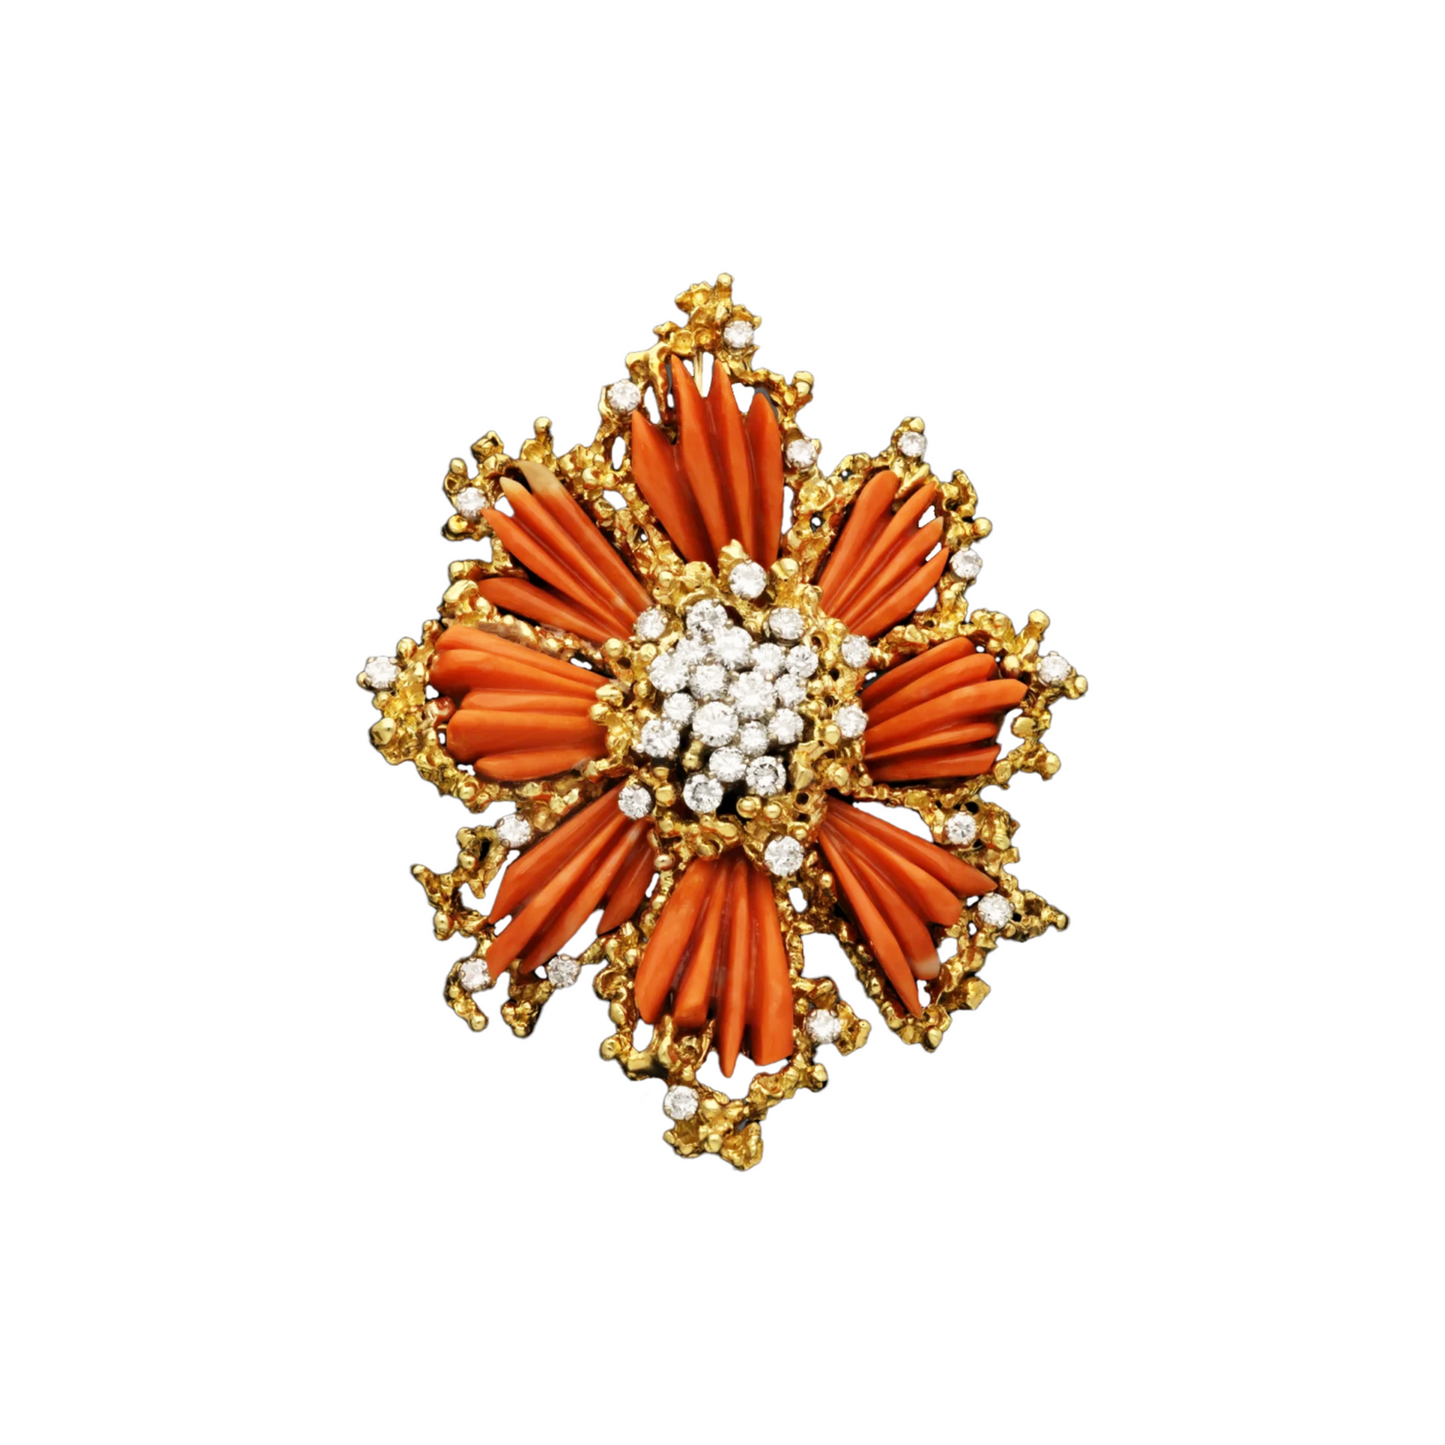 Kutchinsky 1960s 18KT Yellow Gold Coral & Diamond Brooch Pendant front